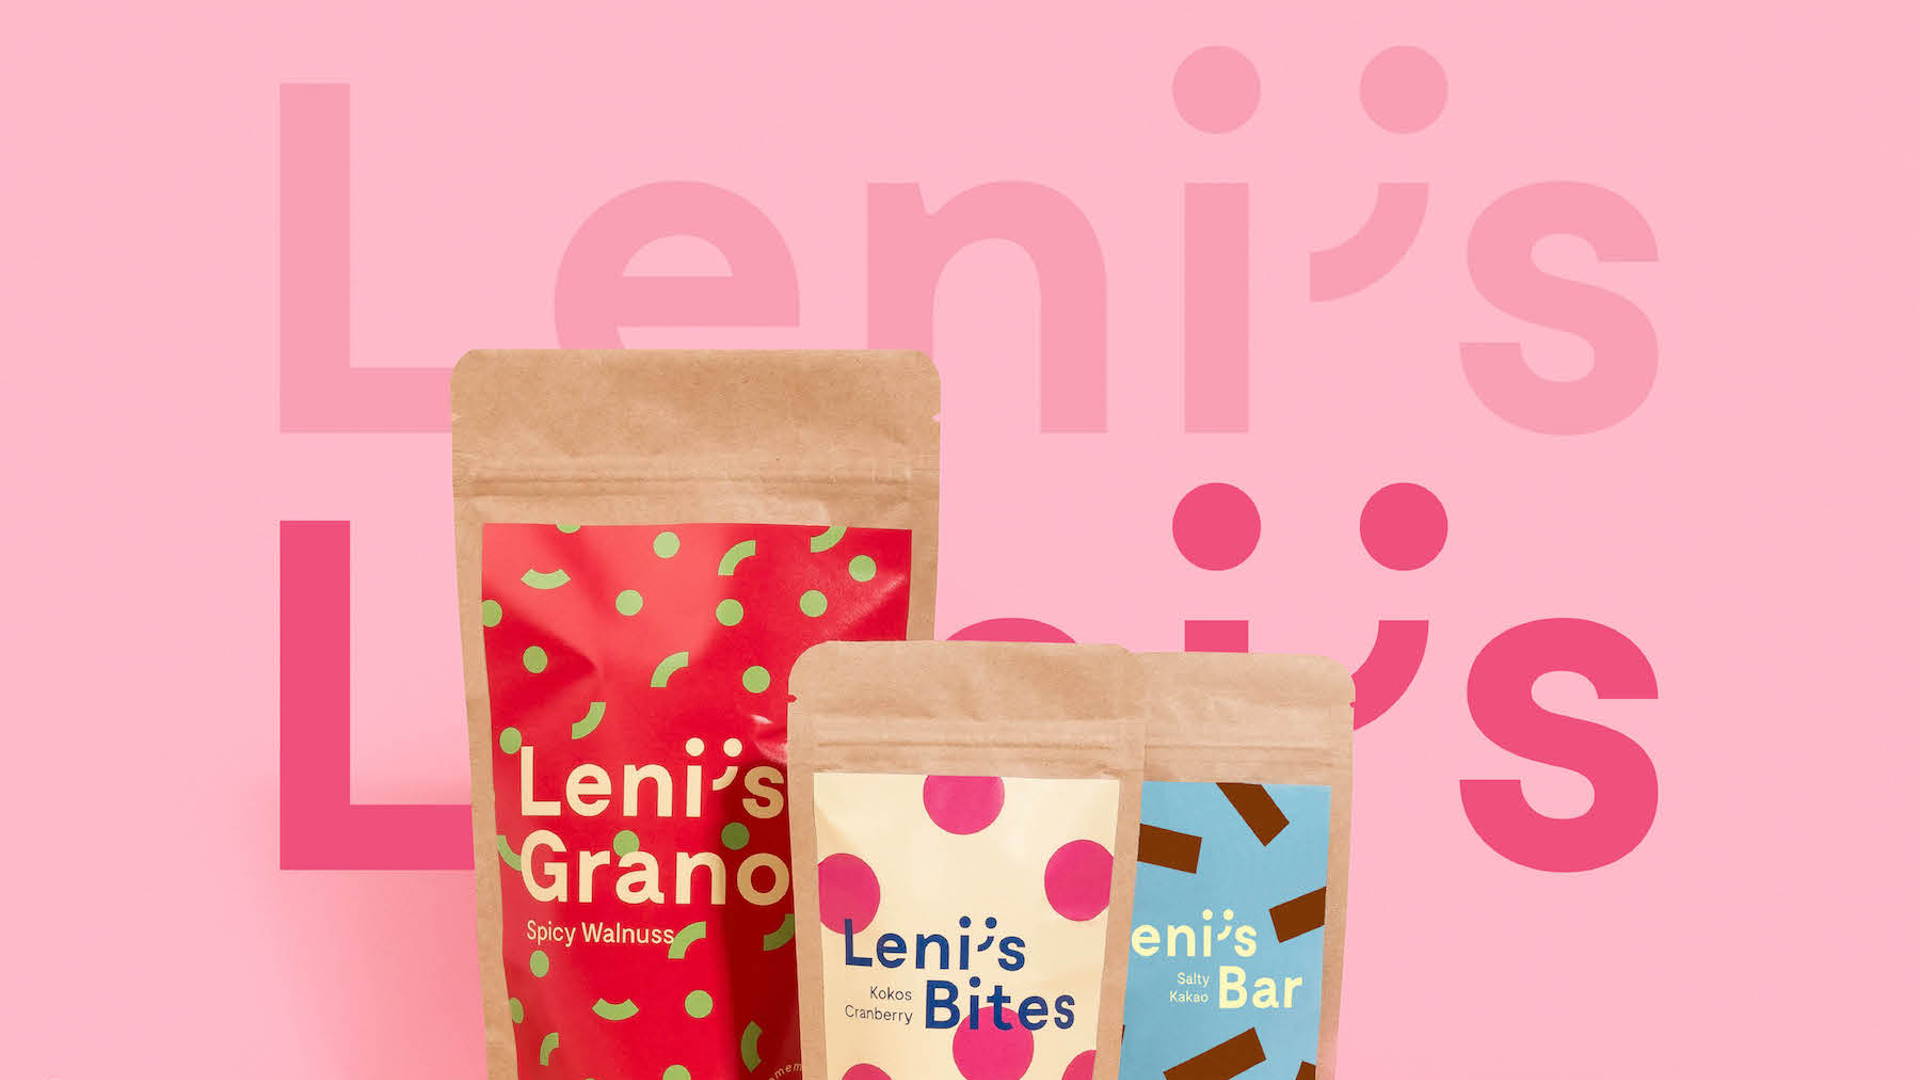 Featured image for The Packaging Pops on these Super Good Healthy Snacks